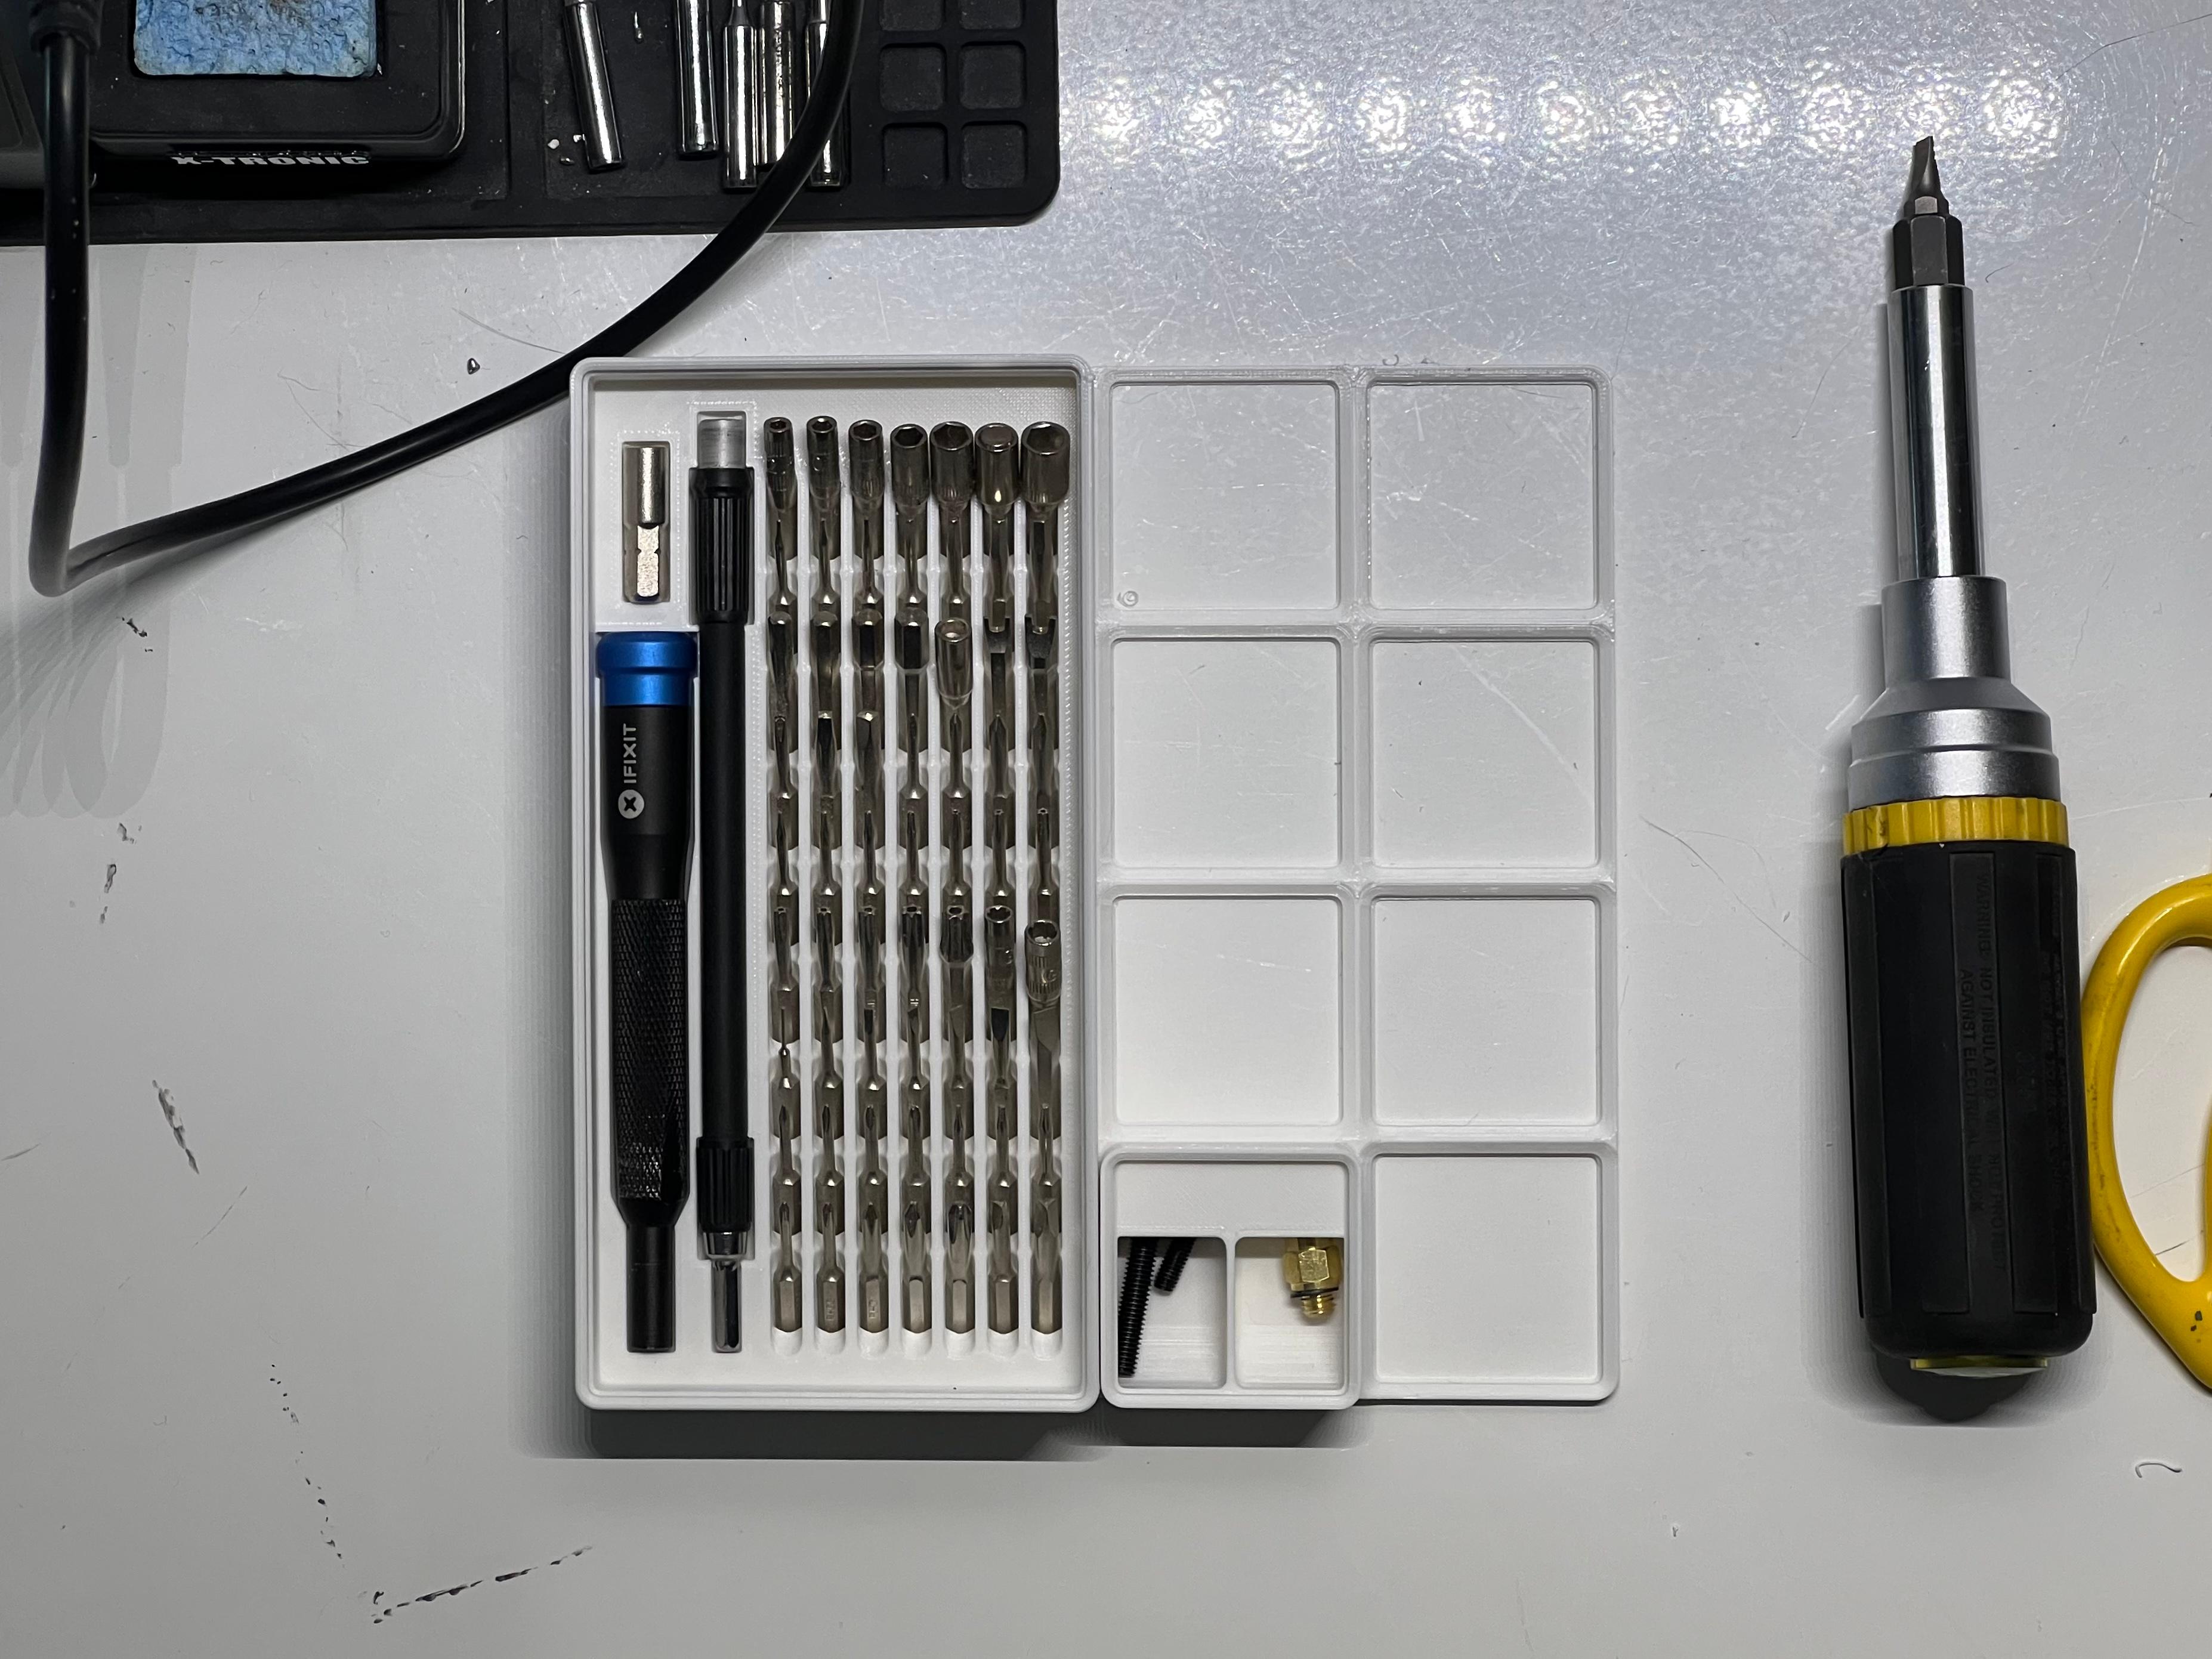 Gridfinity iFixit Mako + ES121 Screwdriver Holders - Fits the kit wonderfully! Only issue is that some of the bits with larger tips don't fully seat into their spot. Some quick exactoing should fix that up. - 3d model